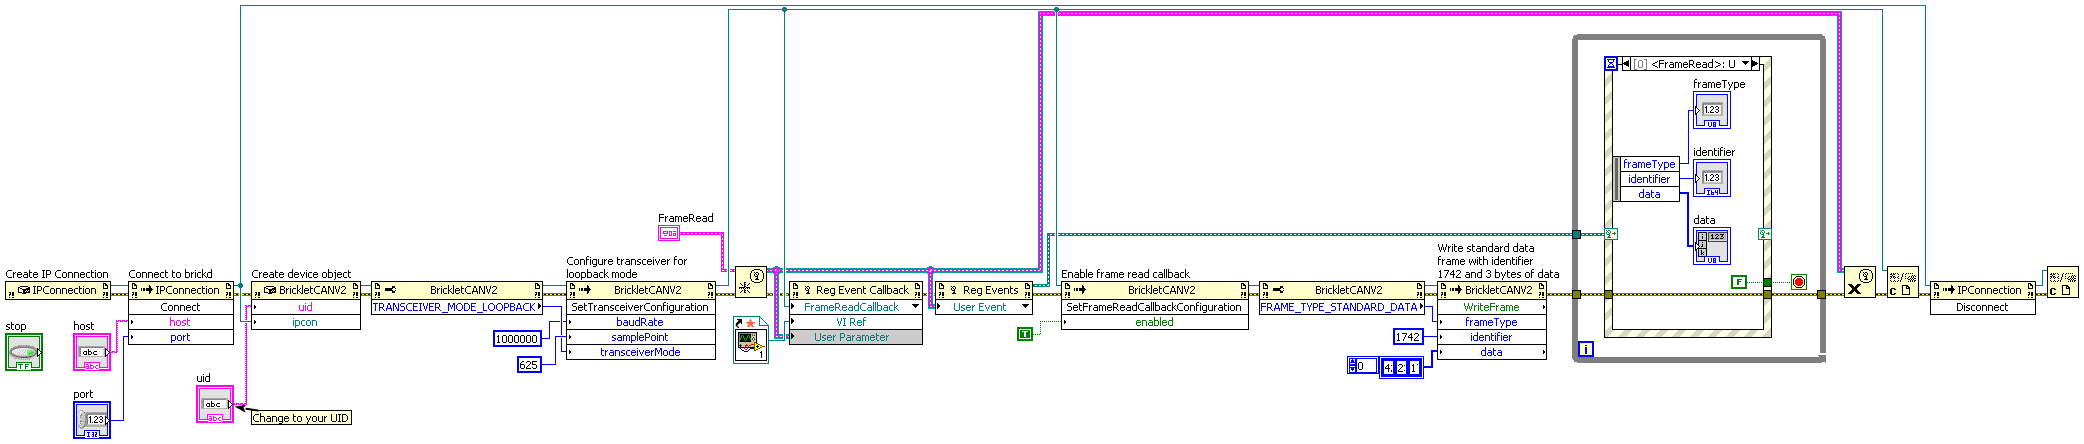 LabVIEW Loopback Example